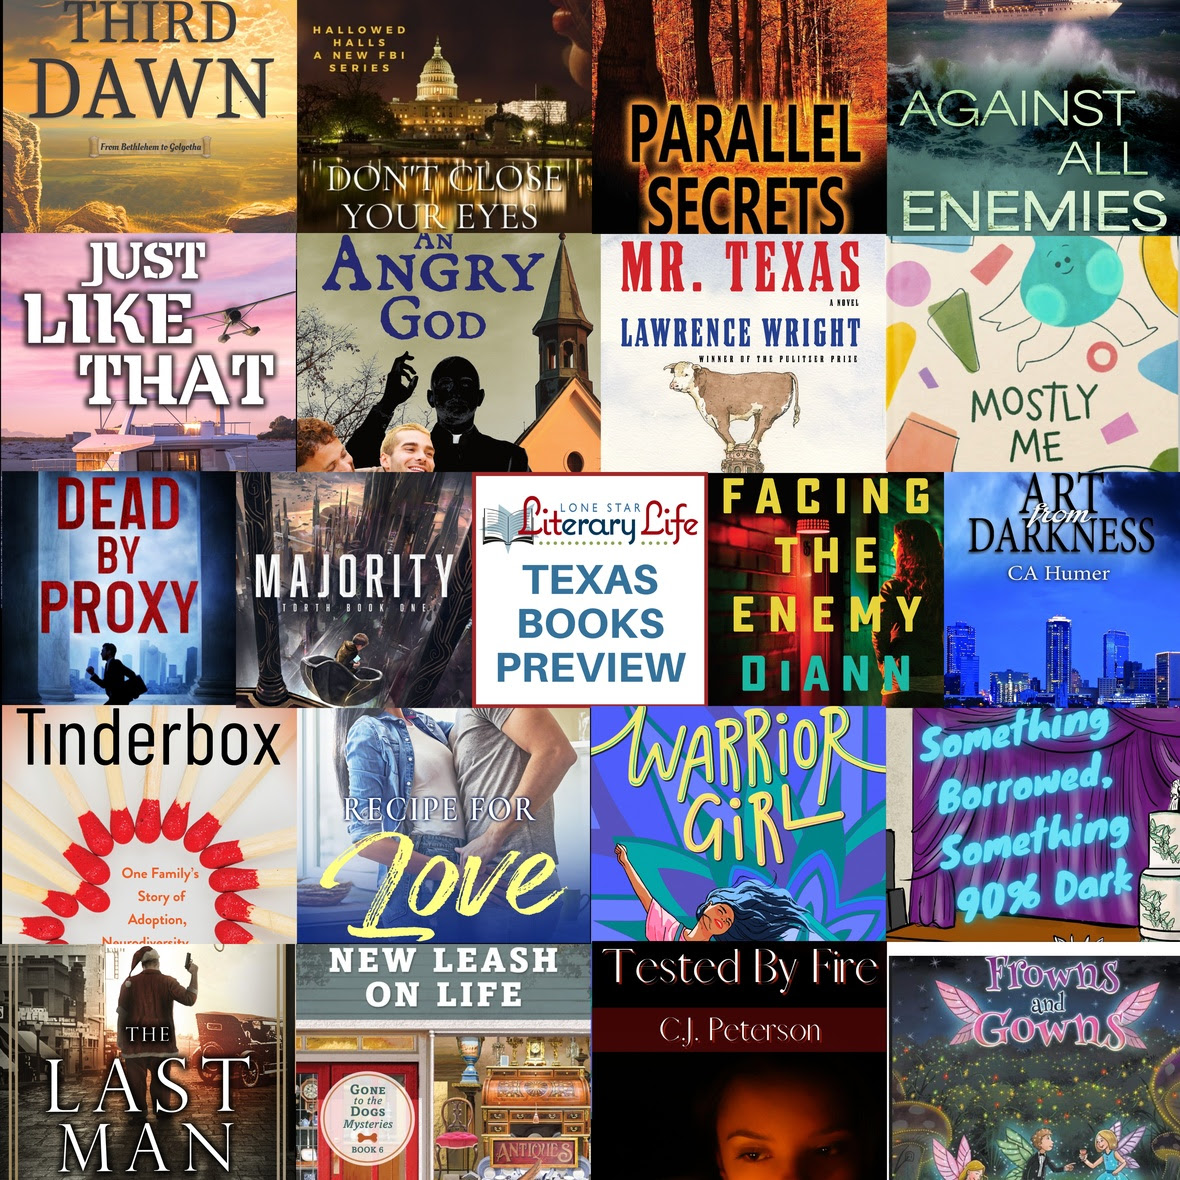 Sept 23 Texas Books Preview Montage